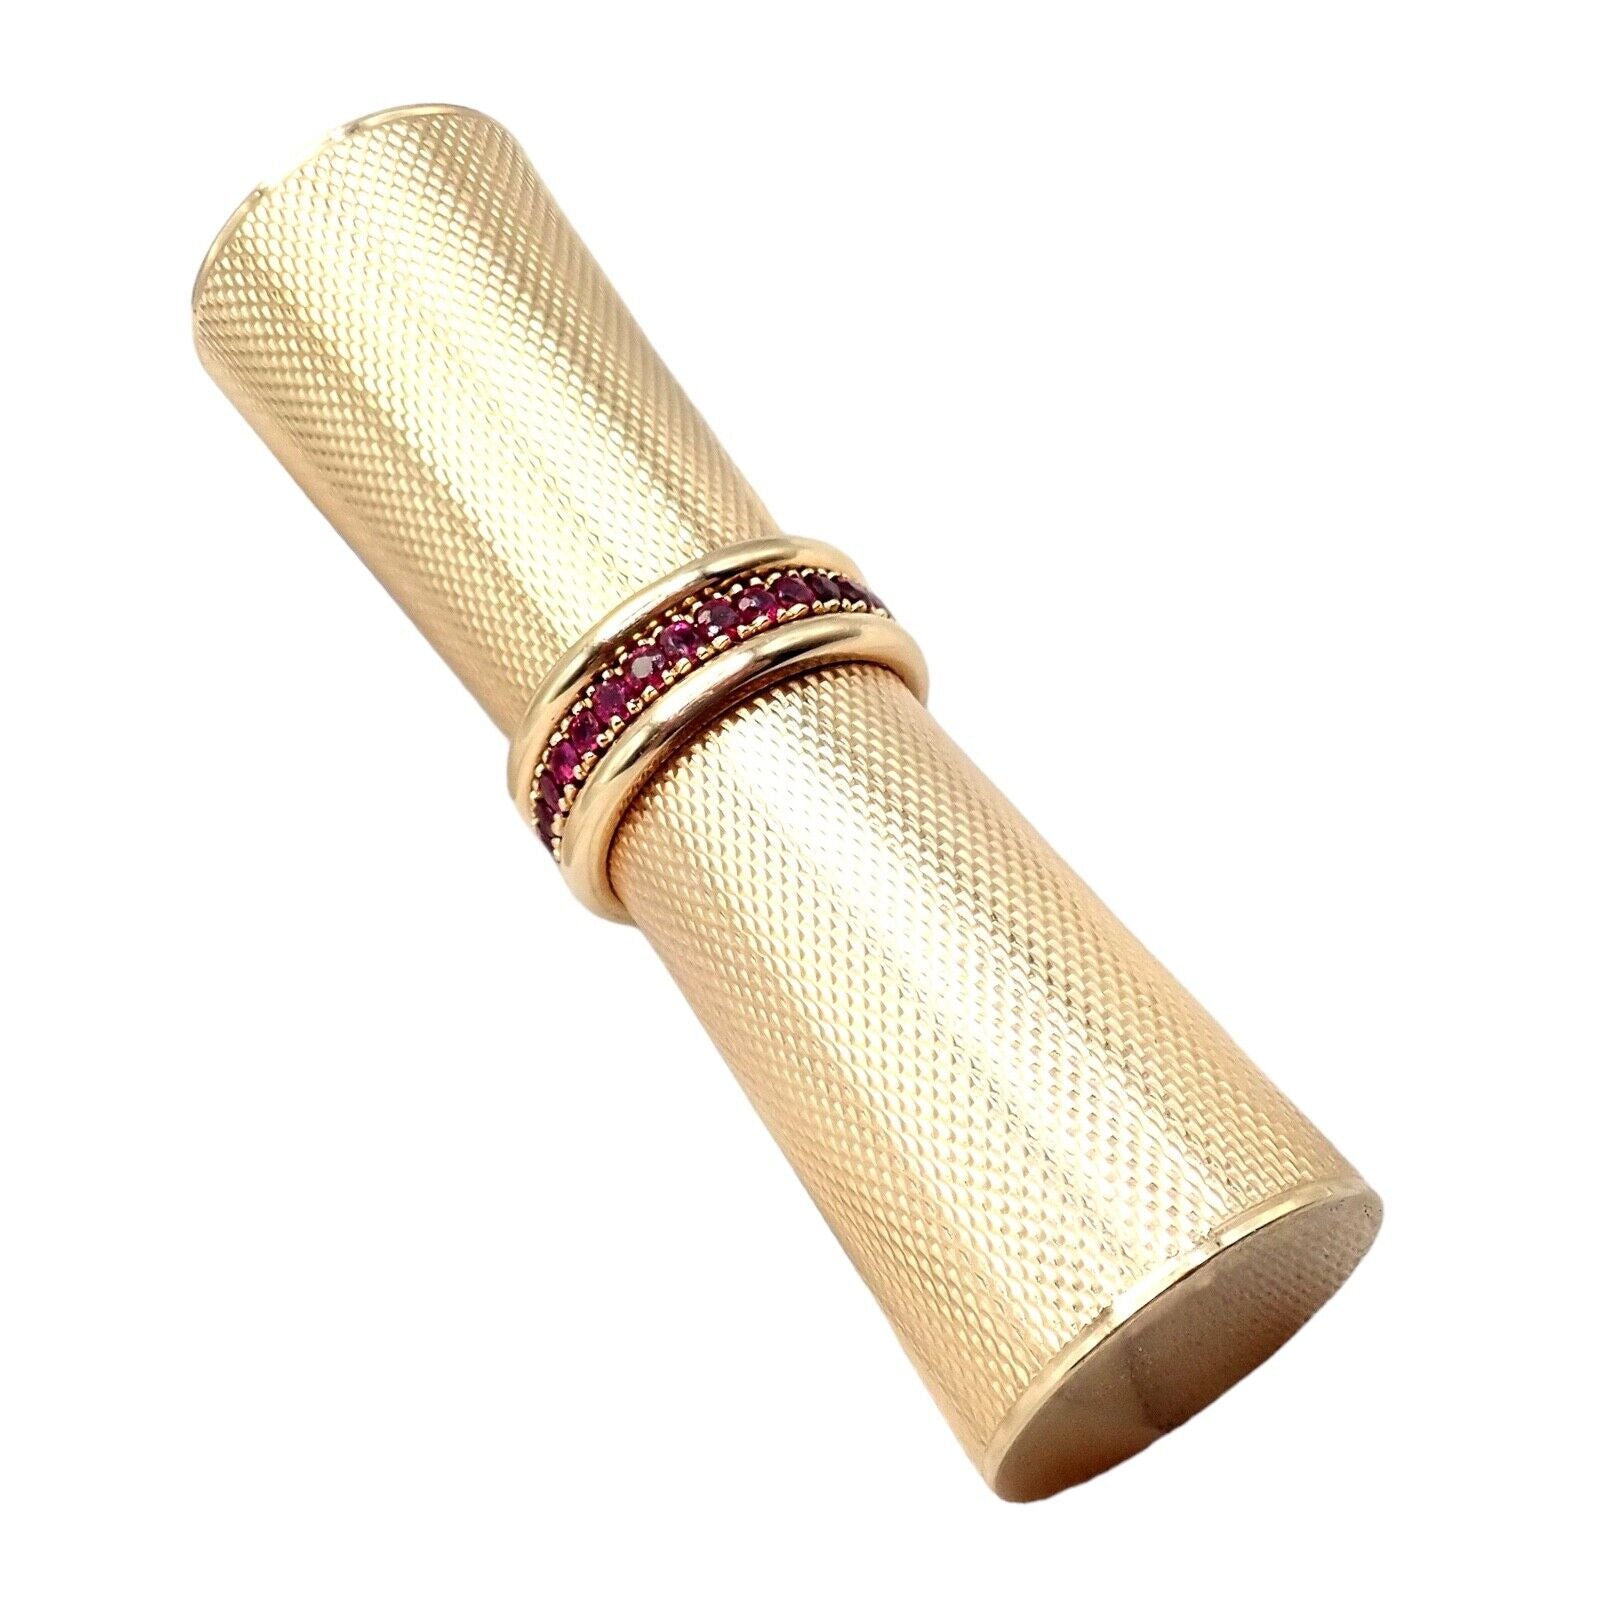 Fortrove Collectibles:Vanity, Perfume & Shaving:Lipstick Tubes, Holders Vintage Solid 14k Yellow Gold Van Cleef & Arpels Ruby Lipstick Case Holder